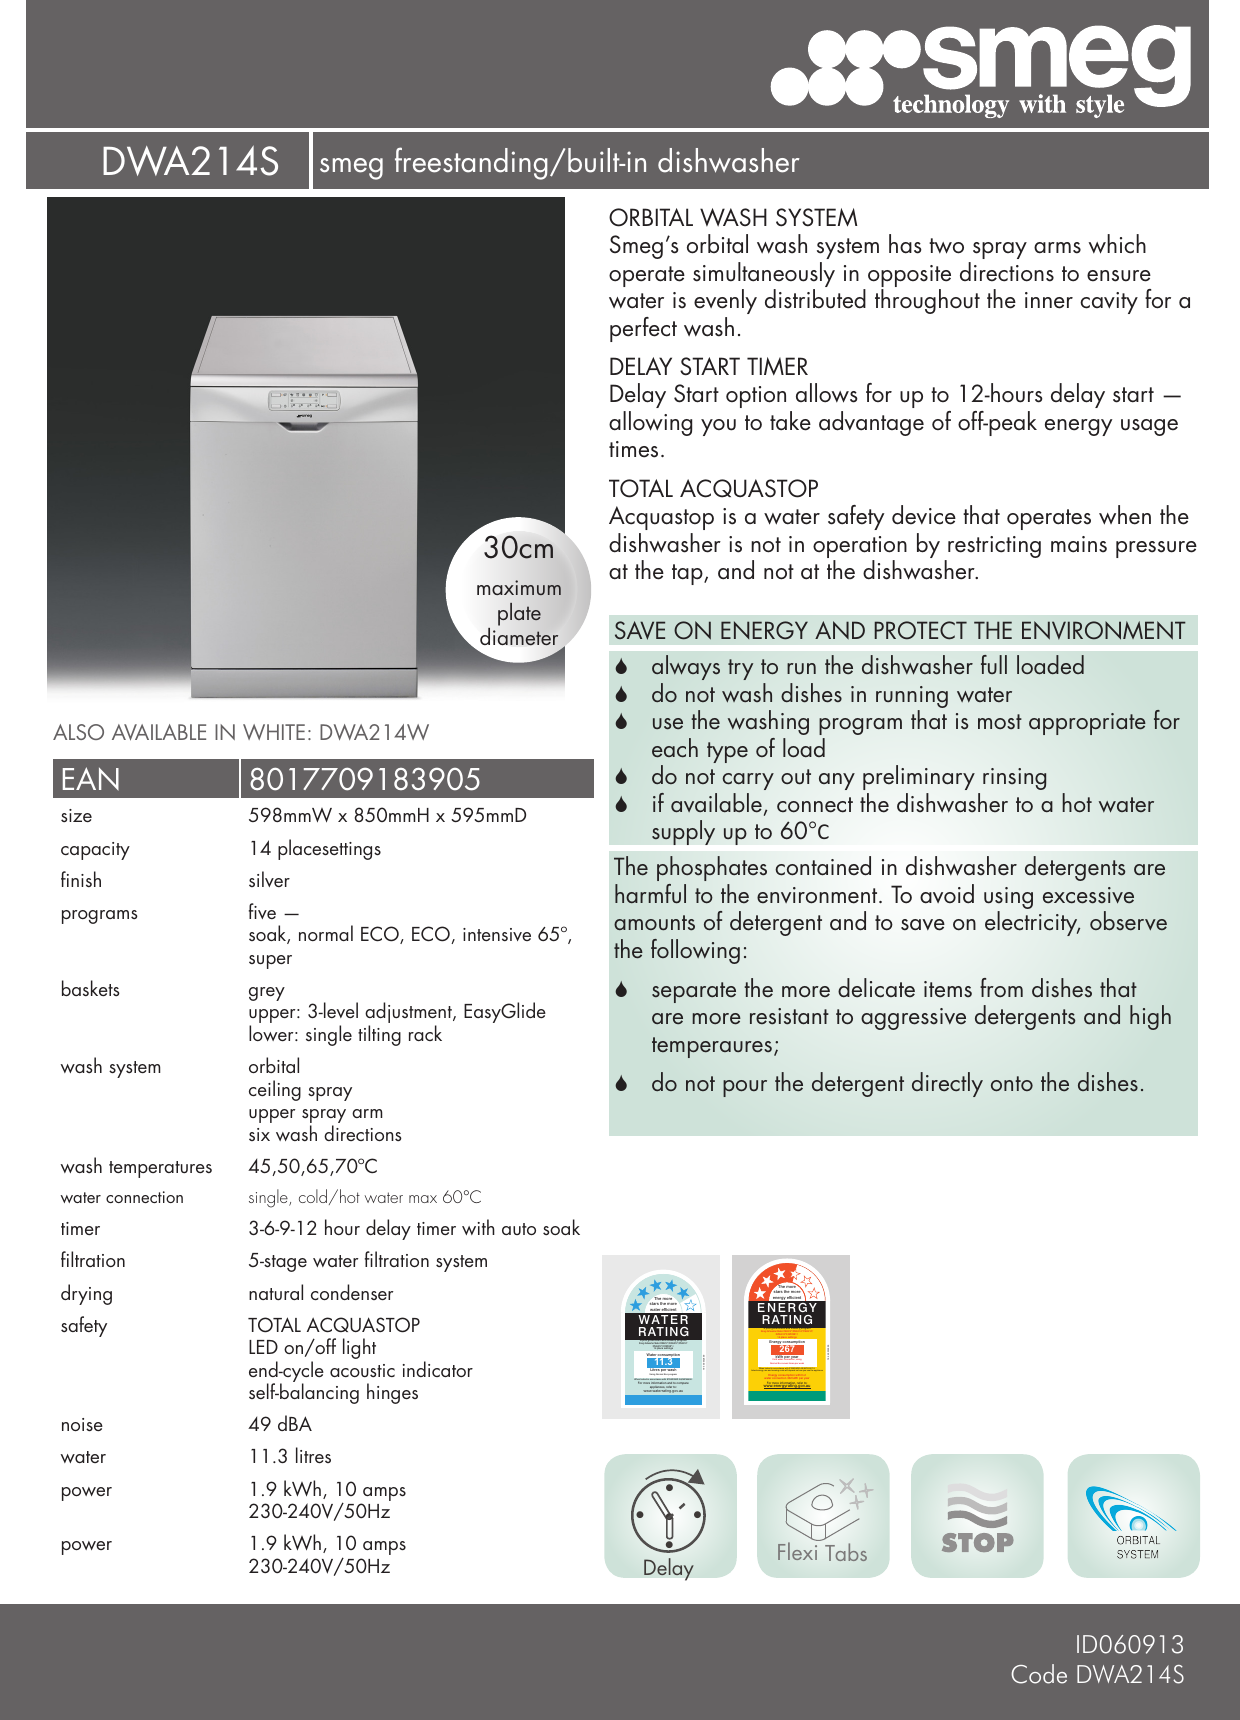 Page 1 of 2 - Smeg DWA214S User Manual  To The Ada262b6-afc2-414e-b570-cfe75f71bd03